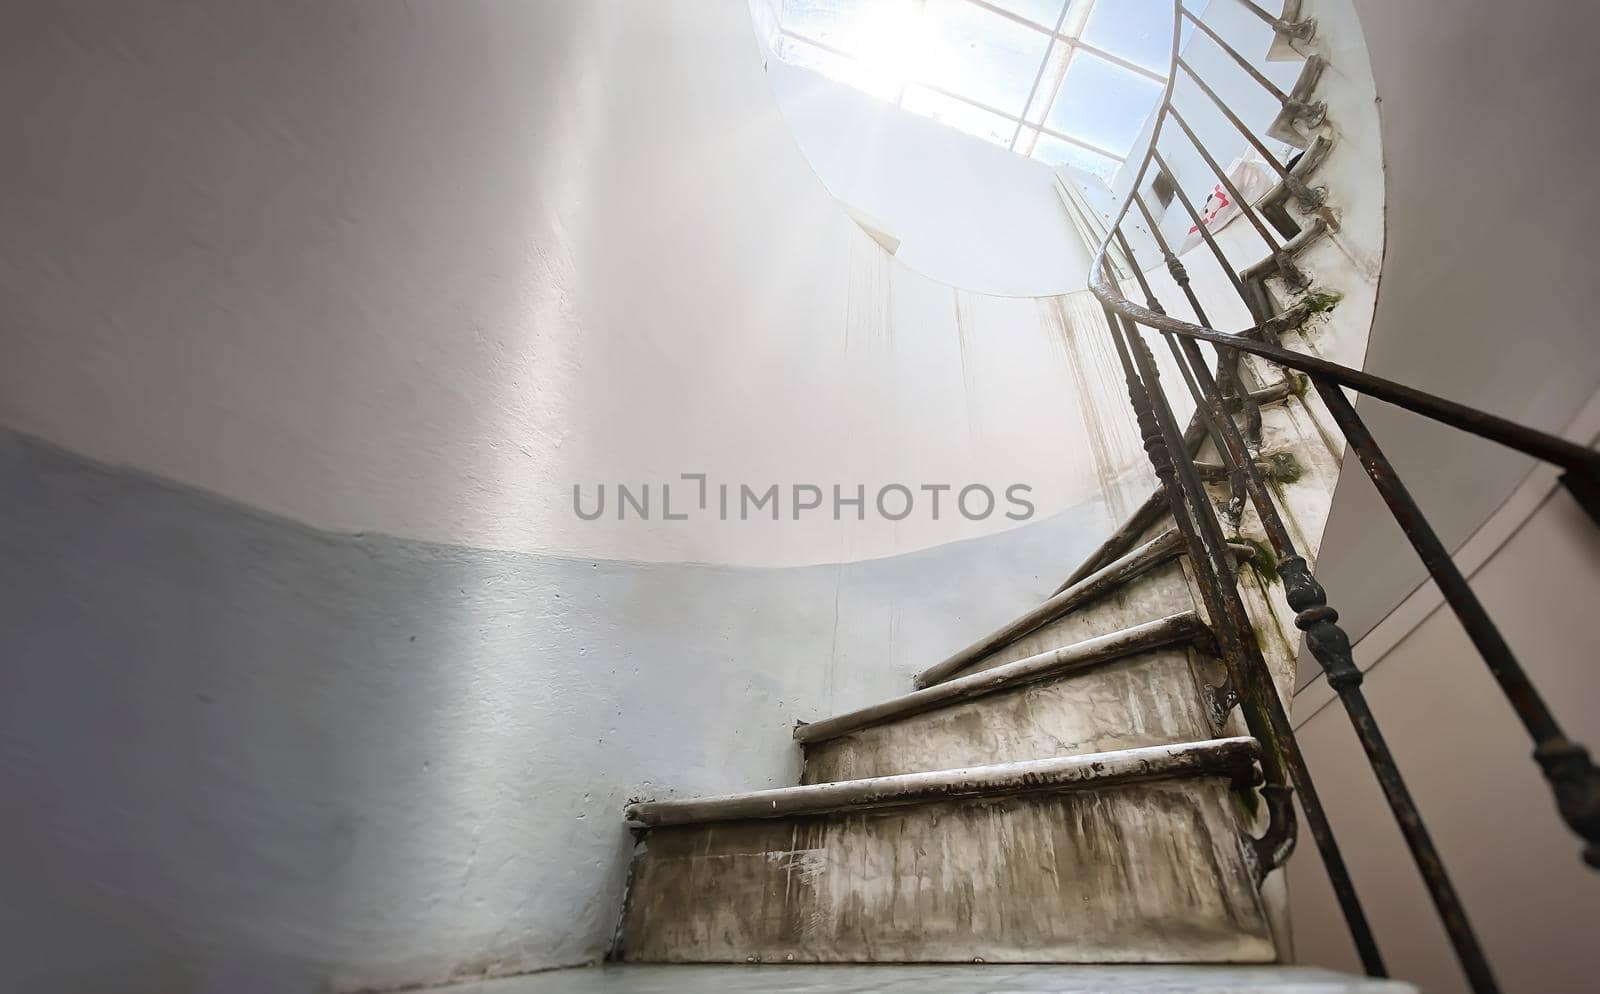 Ancient spiral staircase with marble steps and wrought iron handrail. Natural light coming in through the skylight. Architecture and circular shape